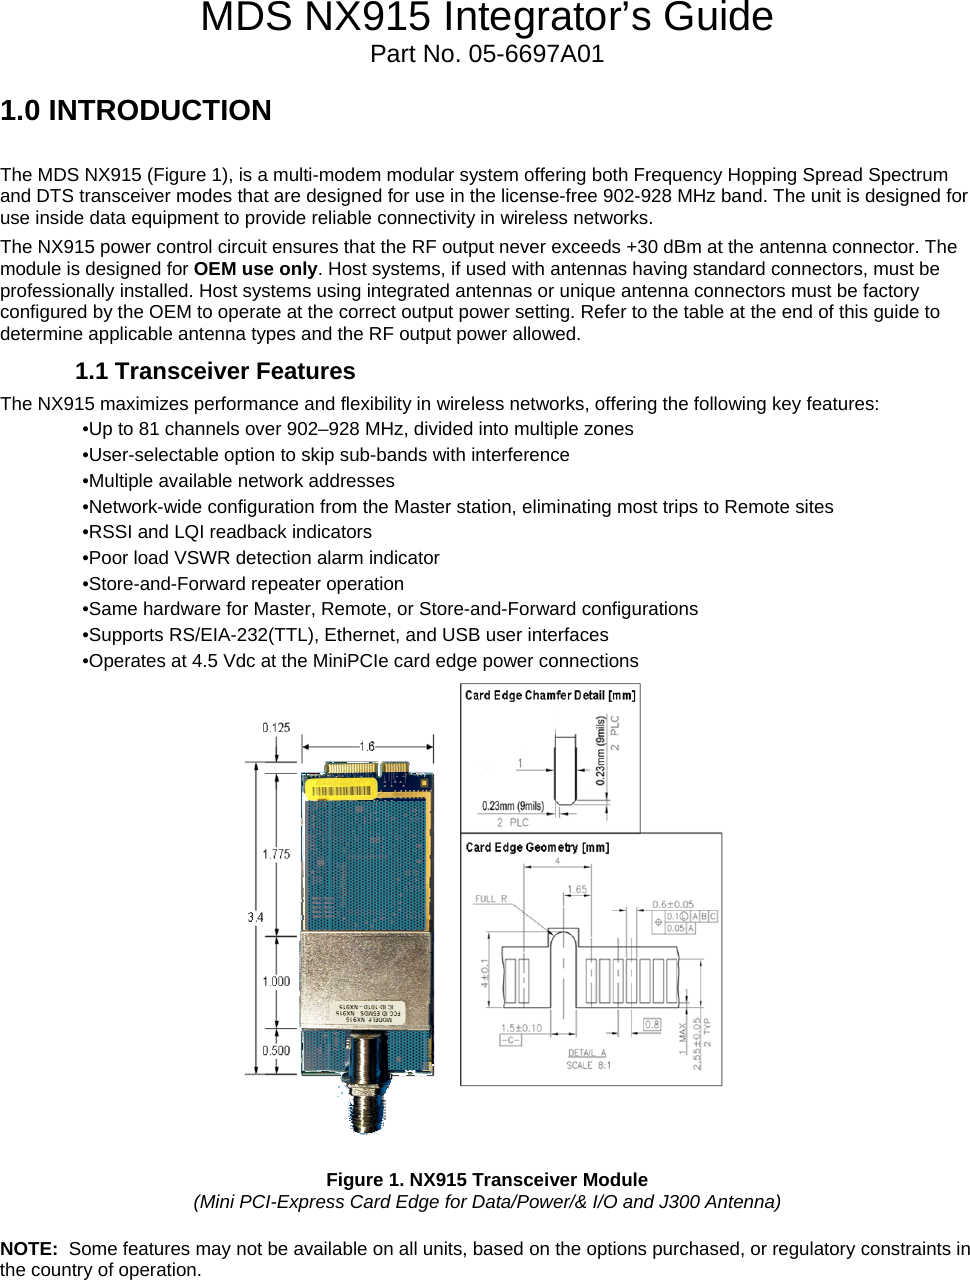 MDS NX915 Integrator’s Guide Part No. 05-6697A01 1.0 INTRODUCTION   The MDS NX915 (Figure 1), is a multi-modem modular system offering both Frequency Hopping Spread Spectrum and DTS transceiver modes that are designed for use in the license-free 902-928 MHz band. The unit is designed for use inside data equipment to provide reliable connectivity in wireless networks. The NX915 power control circuit ensures that the RF output never exceeds +30 dBm at the antenna connector. The module is designed for OEM use only. Host systems, if used with antennas having standard connectors, must be professionally installed. Host systems using integrated antennas or unique antenna connectors must be factory configured by the OEM to operate at the correct output power setting. Refer to the table at the end of this guide to determine applicable antenna types and the RF output power allowed. 1.1 Transceiver Features The NX915 maximizes performance and flexibility in wireless networks, offering the following key features: •Up to 81 channels over 902–928 MHz, divided into multiple zones •User-selectable option to skip sub-bands with interference •Multiple available network addresses •Network-wide configuration from the Master station, eliminating most trips to Remote sites •RSSI and LQI readback indicators •Poor load VSWR detection alarm indicator •Store-and-Forward repeater operation •Same hardware for Master, Remote, or Store-and-Forward configurations •Supports RS/EIA-232(TTL), Ethernet, and USB user interfaces •Operates at 4.5 Vdc at the MiniPCIe card edge power connections   Figure 1. NX915 Transceiver Module  (Mini PCI-Express Card Edge for Data/Power/&amp; I/O and J300 Antenna)  NOTE:  Some features may not be available on all units, based on the options purchased, or regulatory constraints in the country of operation.